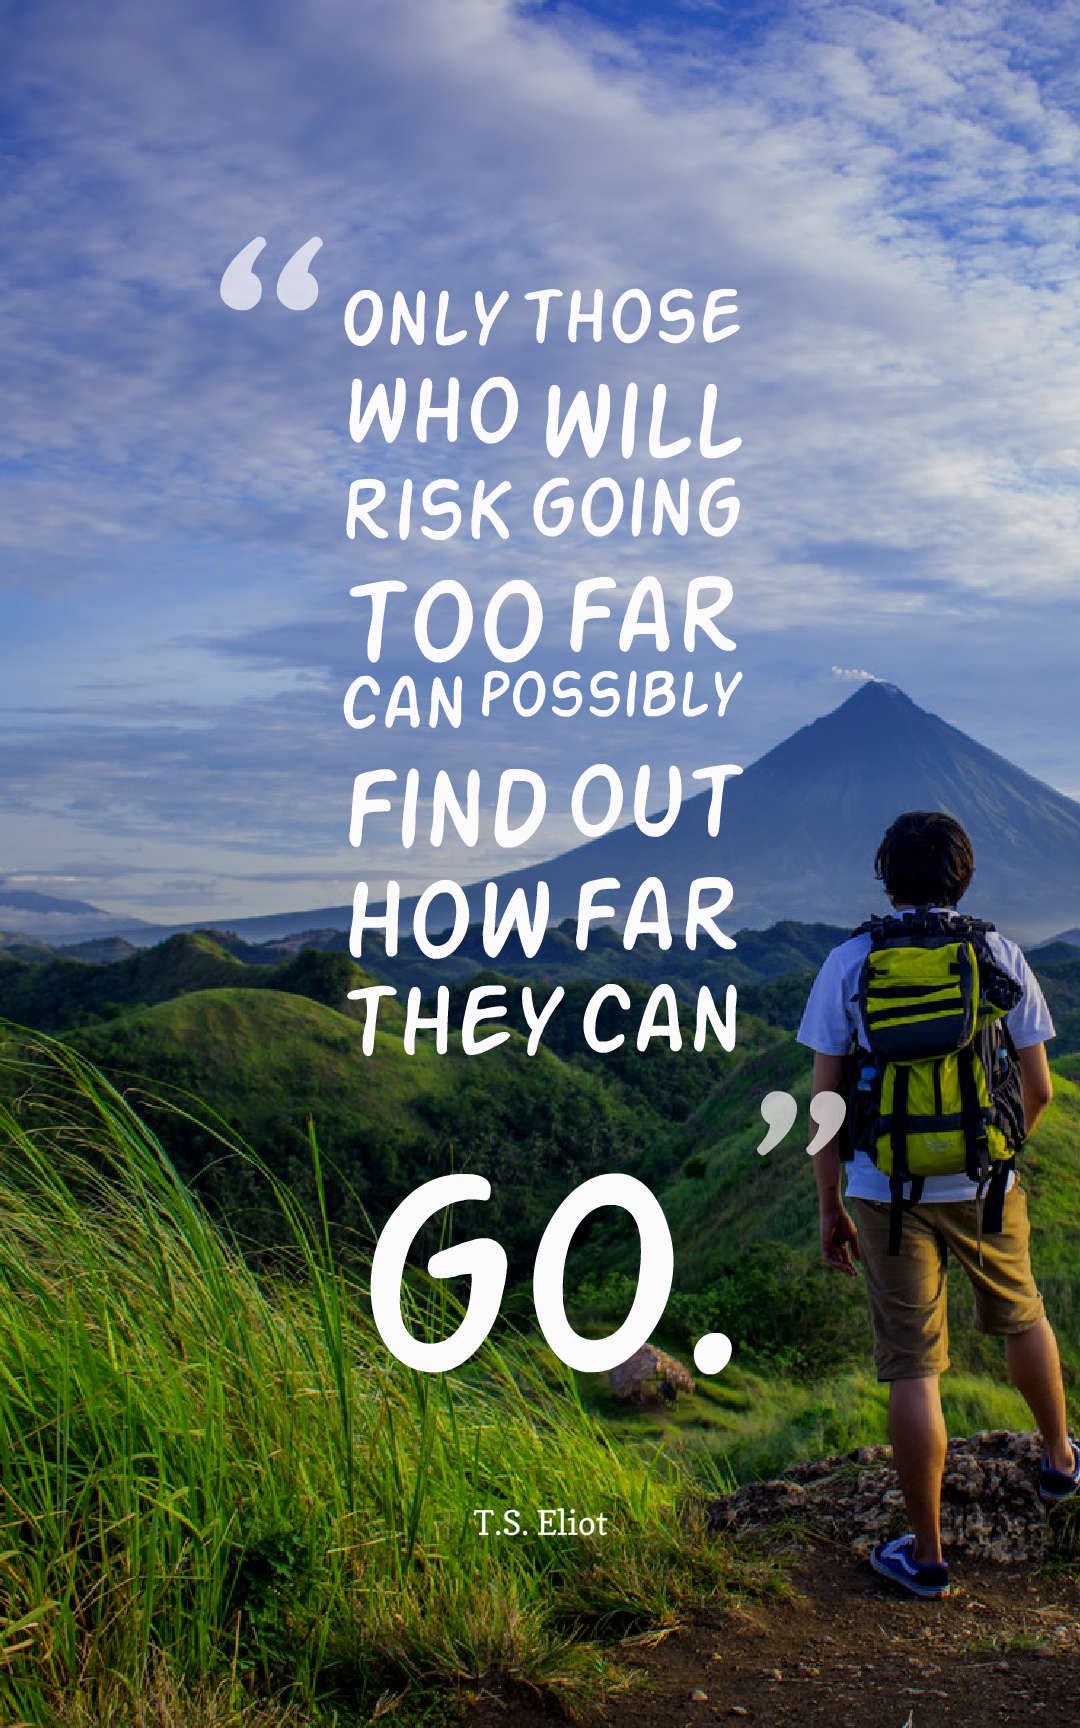 Only those who will risk going too far can possibly find out how far they can go.